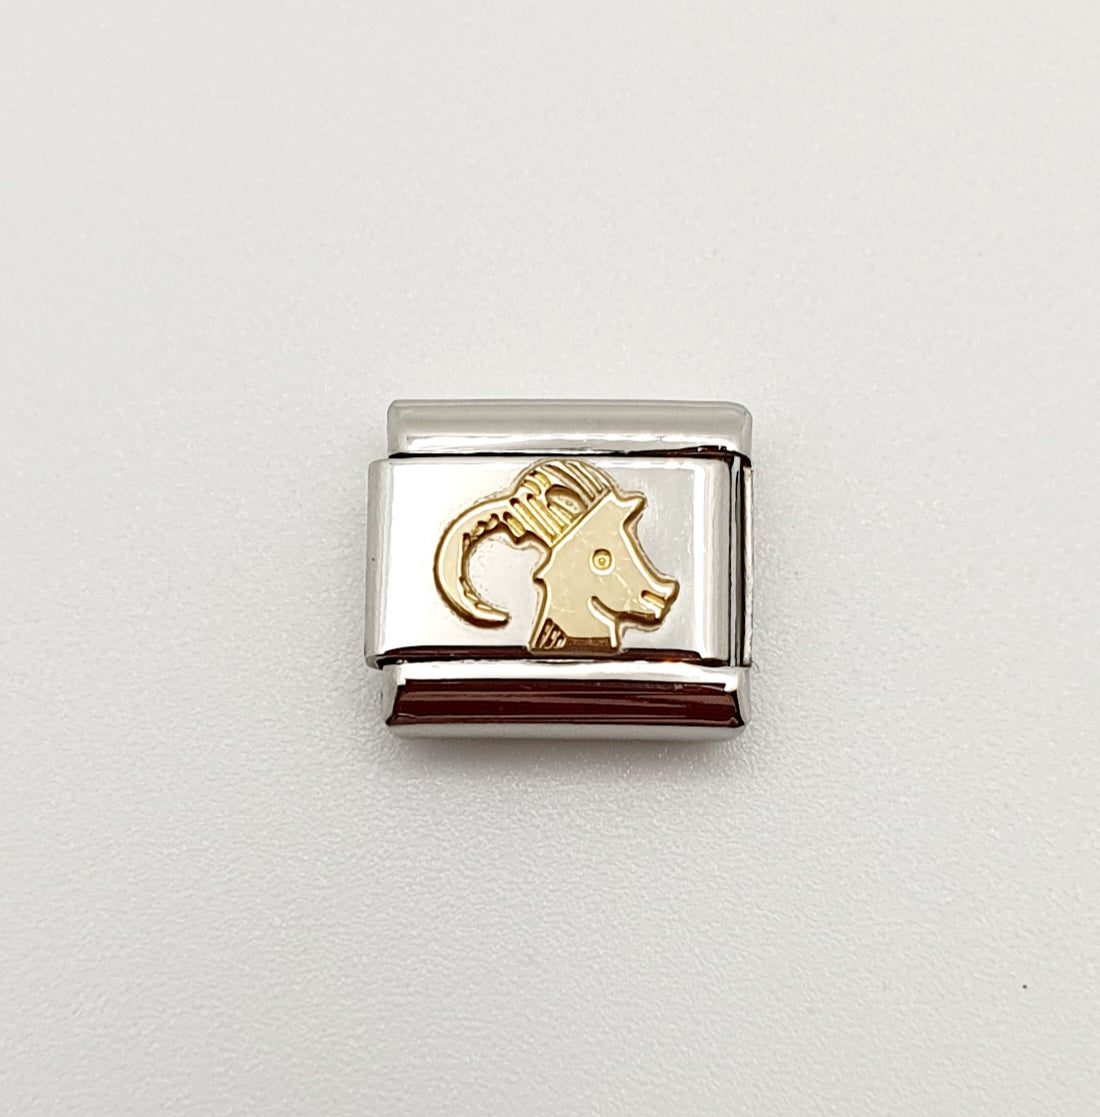 Nomination Charm Link "Capricorn" Stainless Steel with 18k Gold Plate, 0300104 10